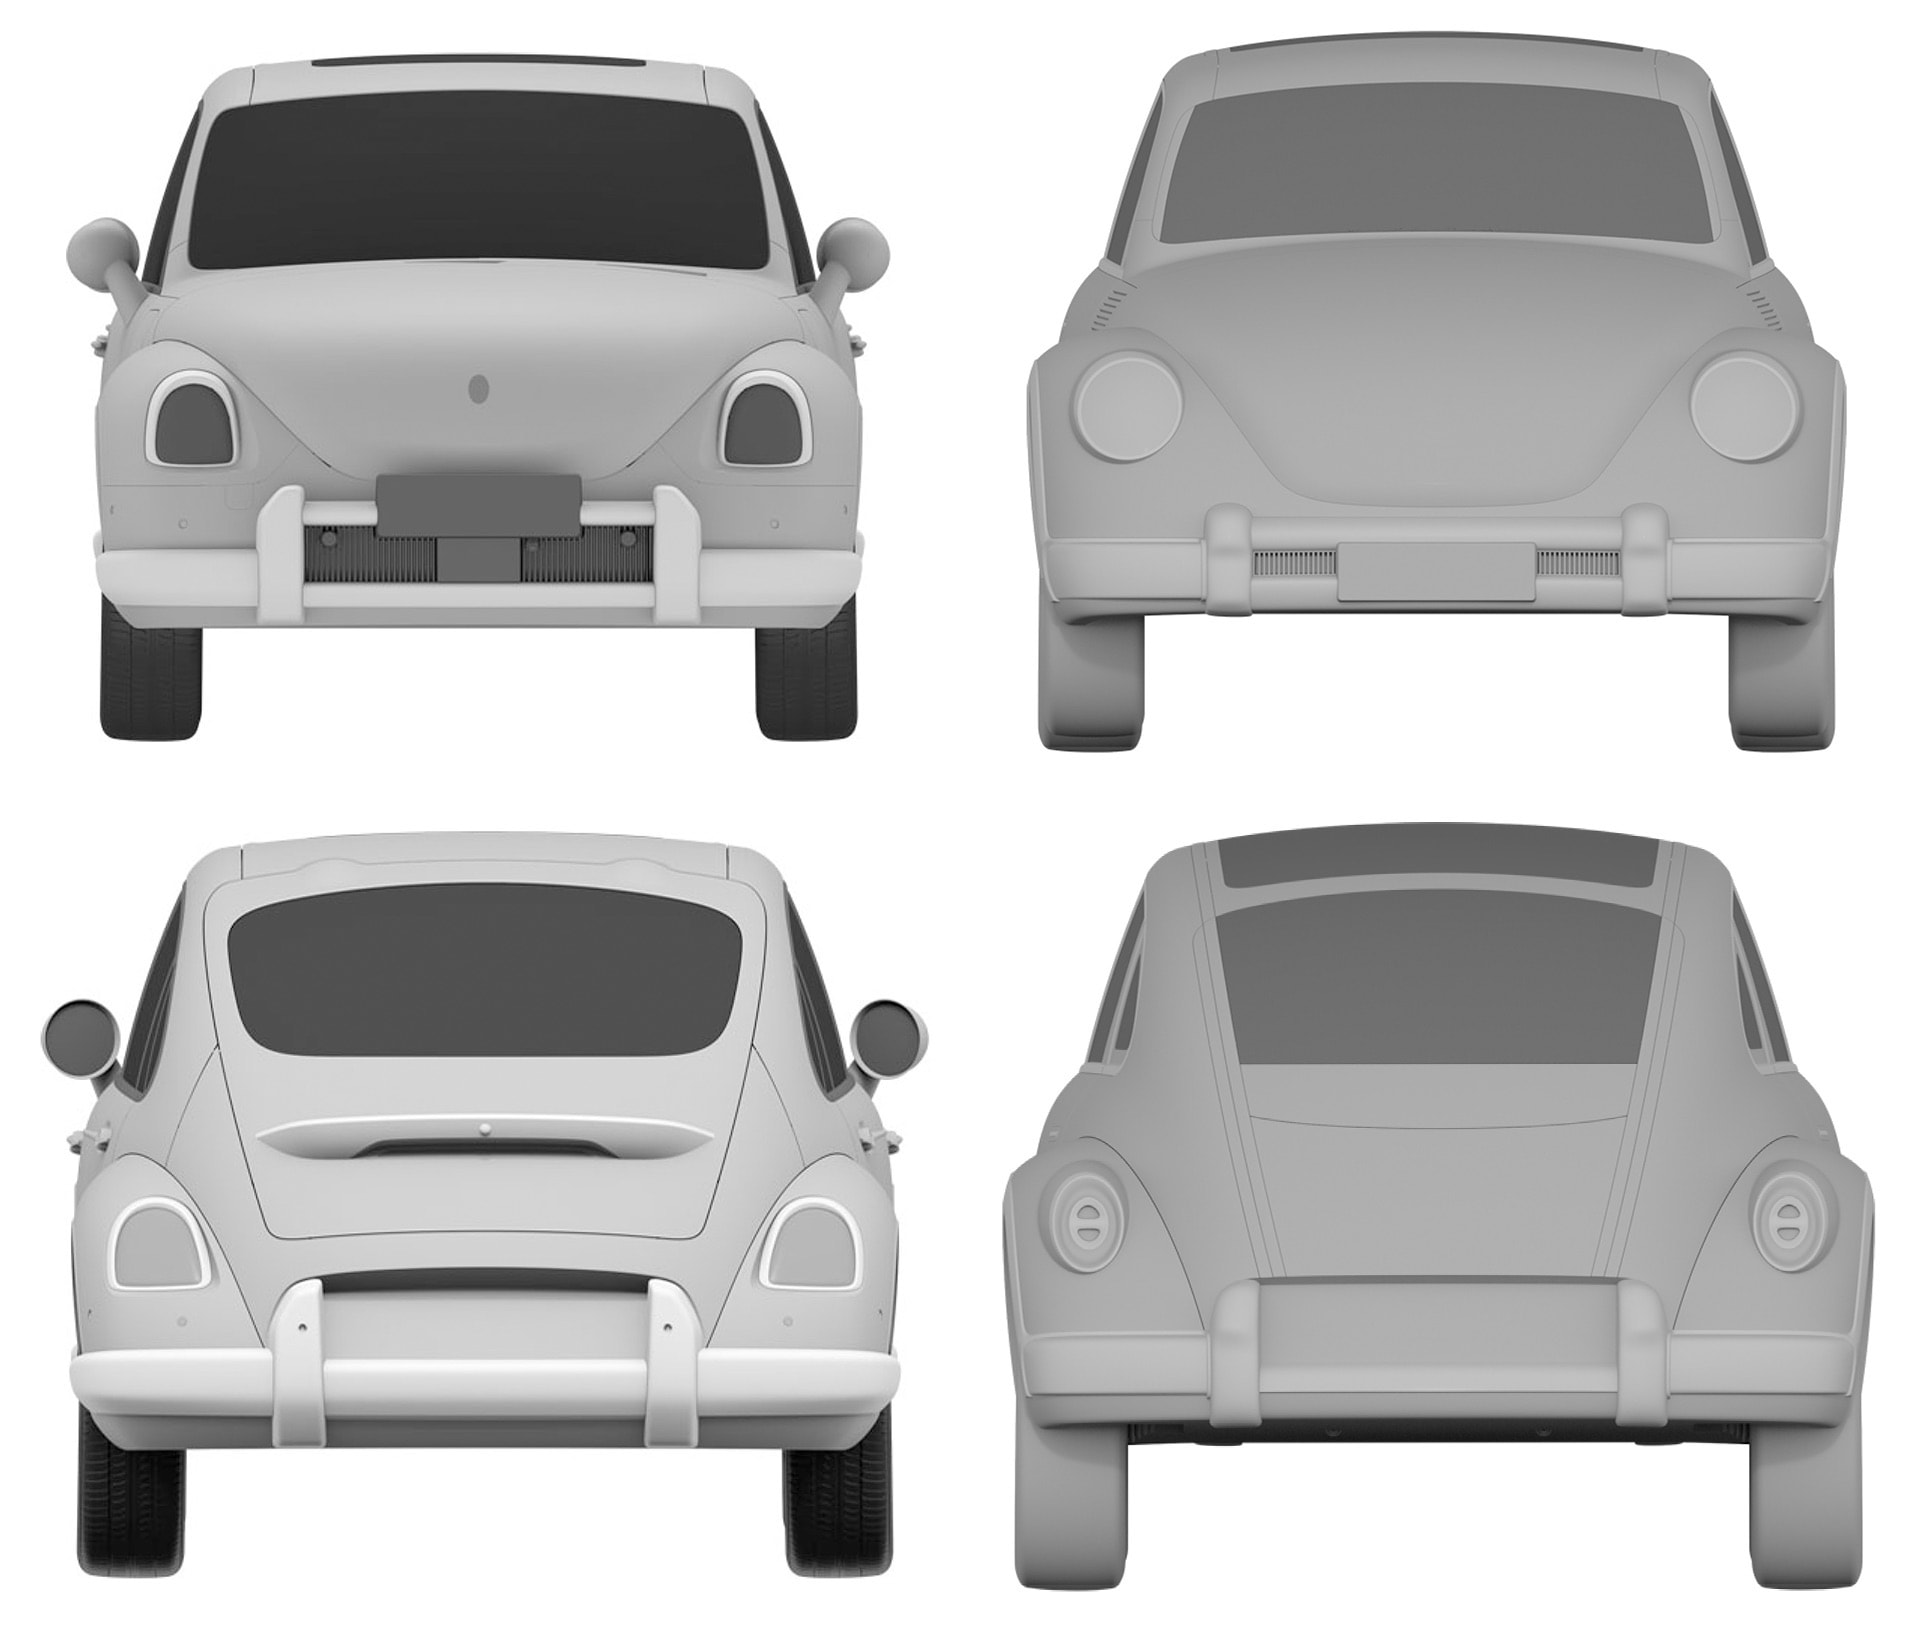 2026 Volkswagen ID Beetle Future Cars: The Bug Goes Electric